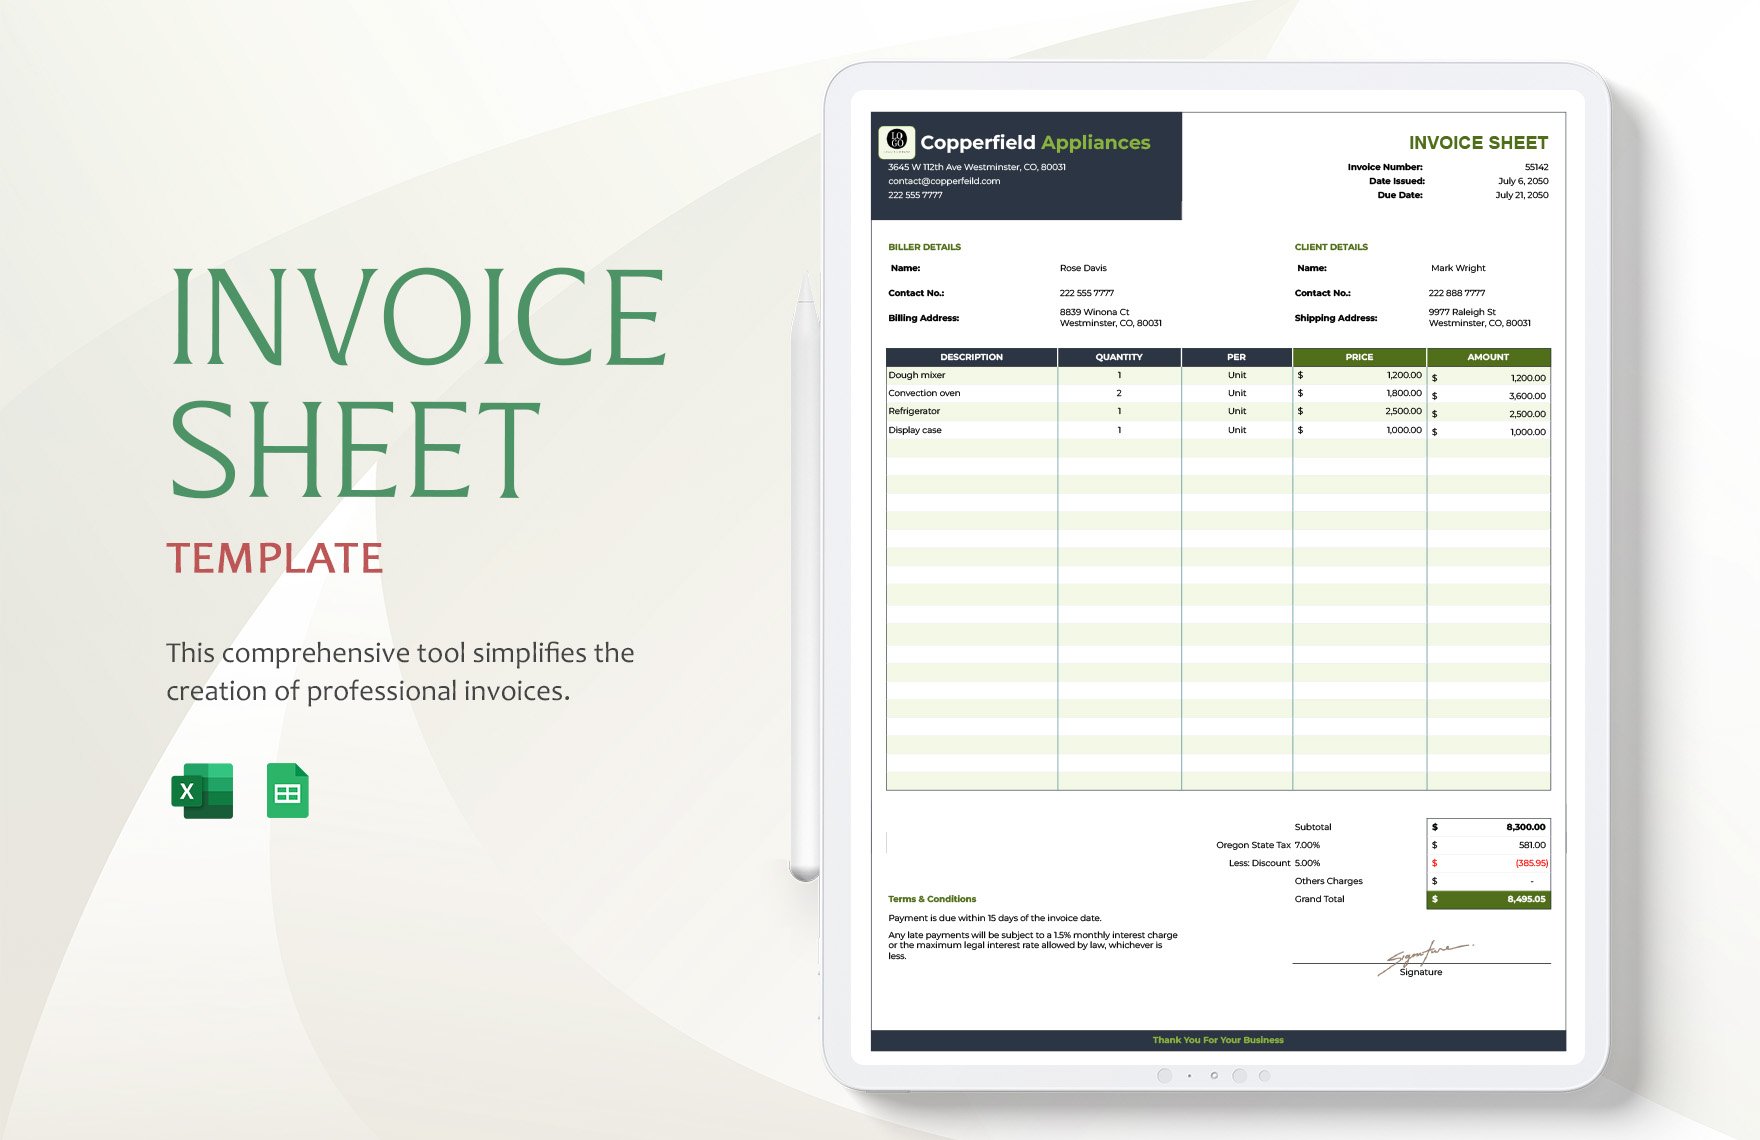 Invoice Sheet Template in Excel, Google Sheets